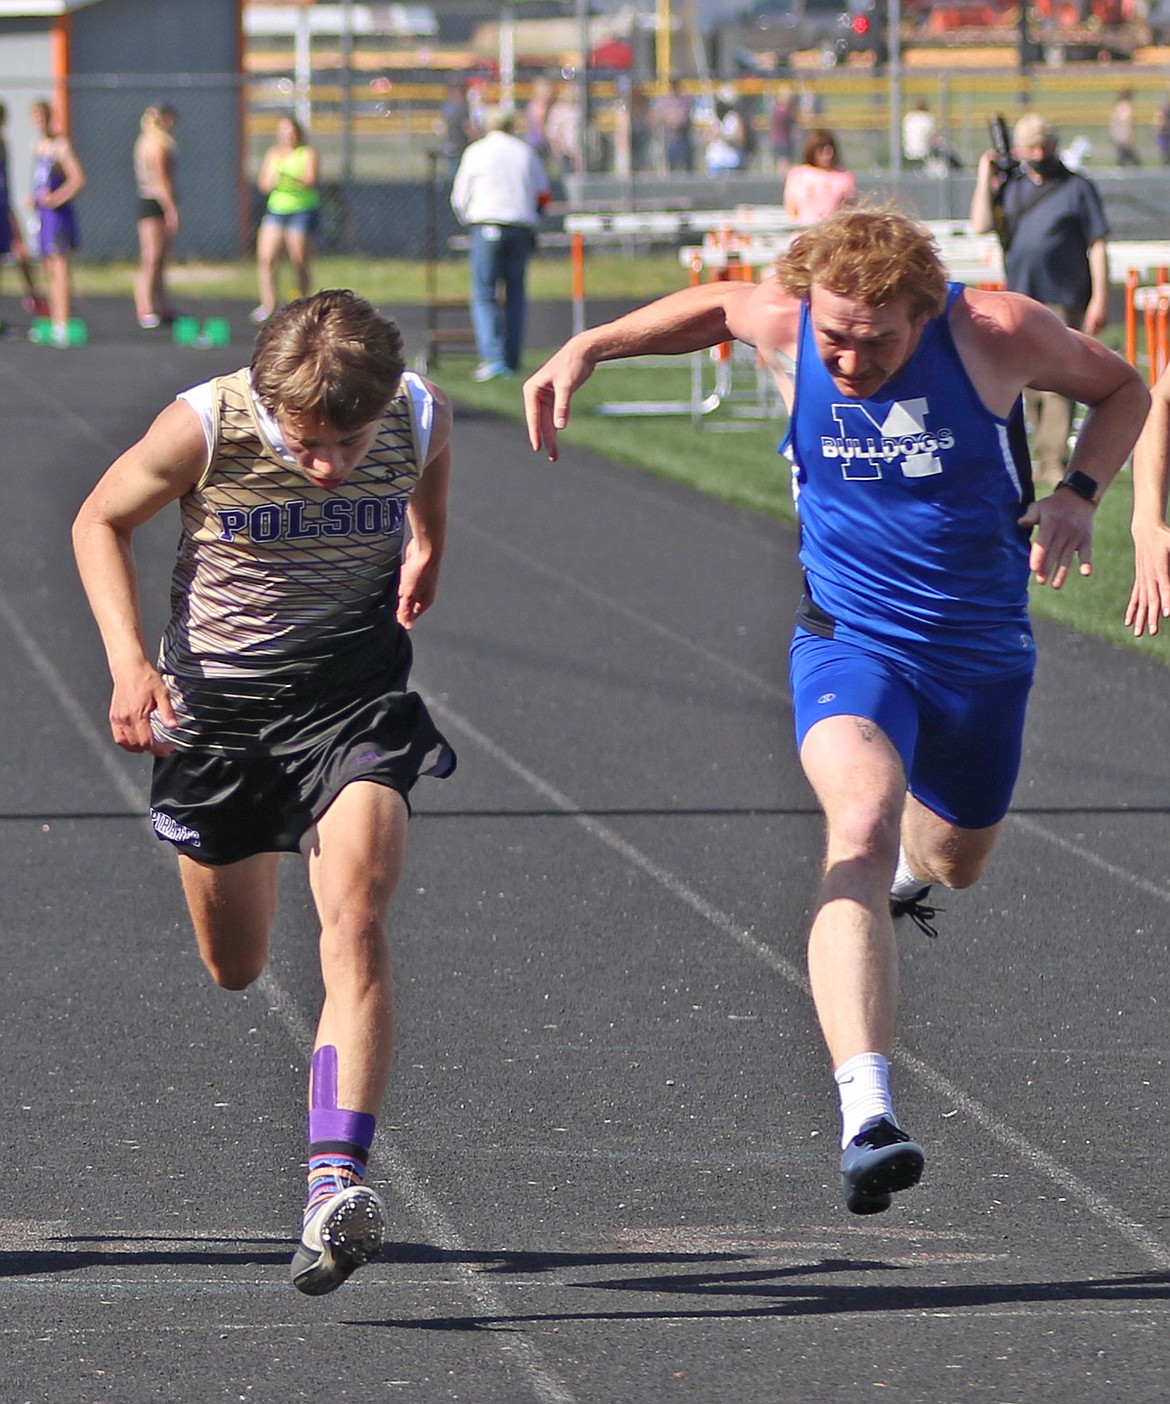 Lucas Targerson of Polson leans for the win in the boys 100 meters next to second-place finisher Charles Adams of Mission. Targerson ran the event in 11.48 seconds, while Adams came in at 11.56. (Courtesy of Bob Gunderson)